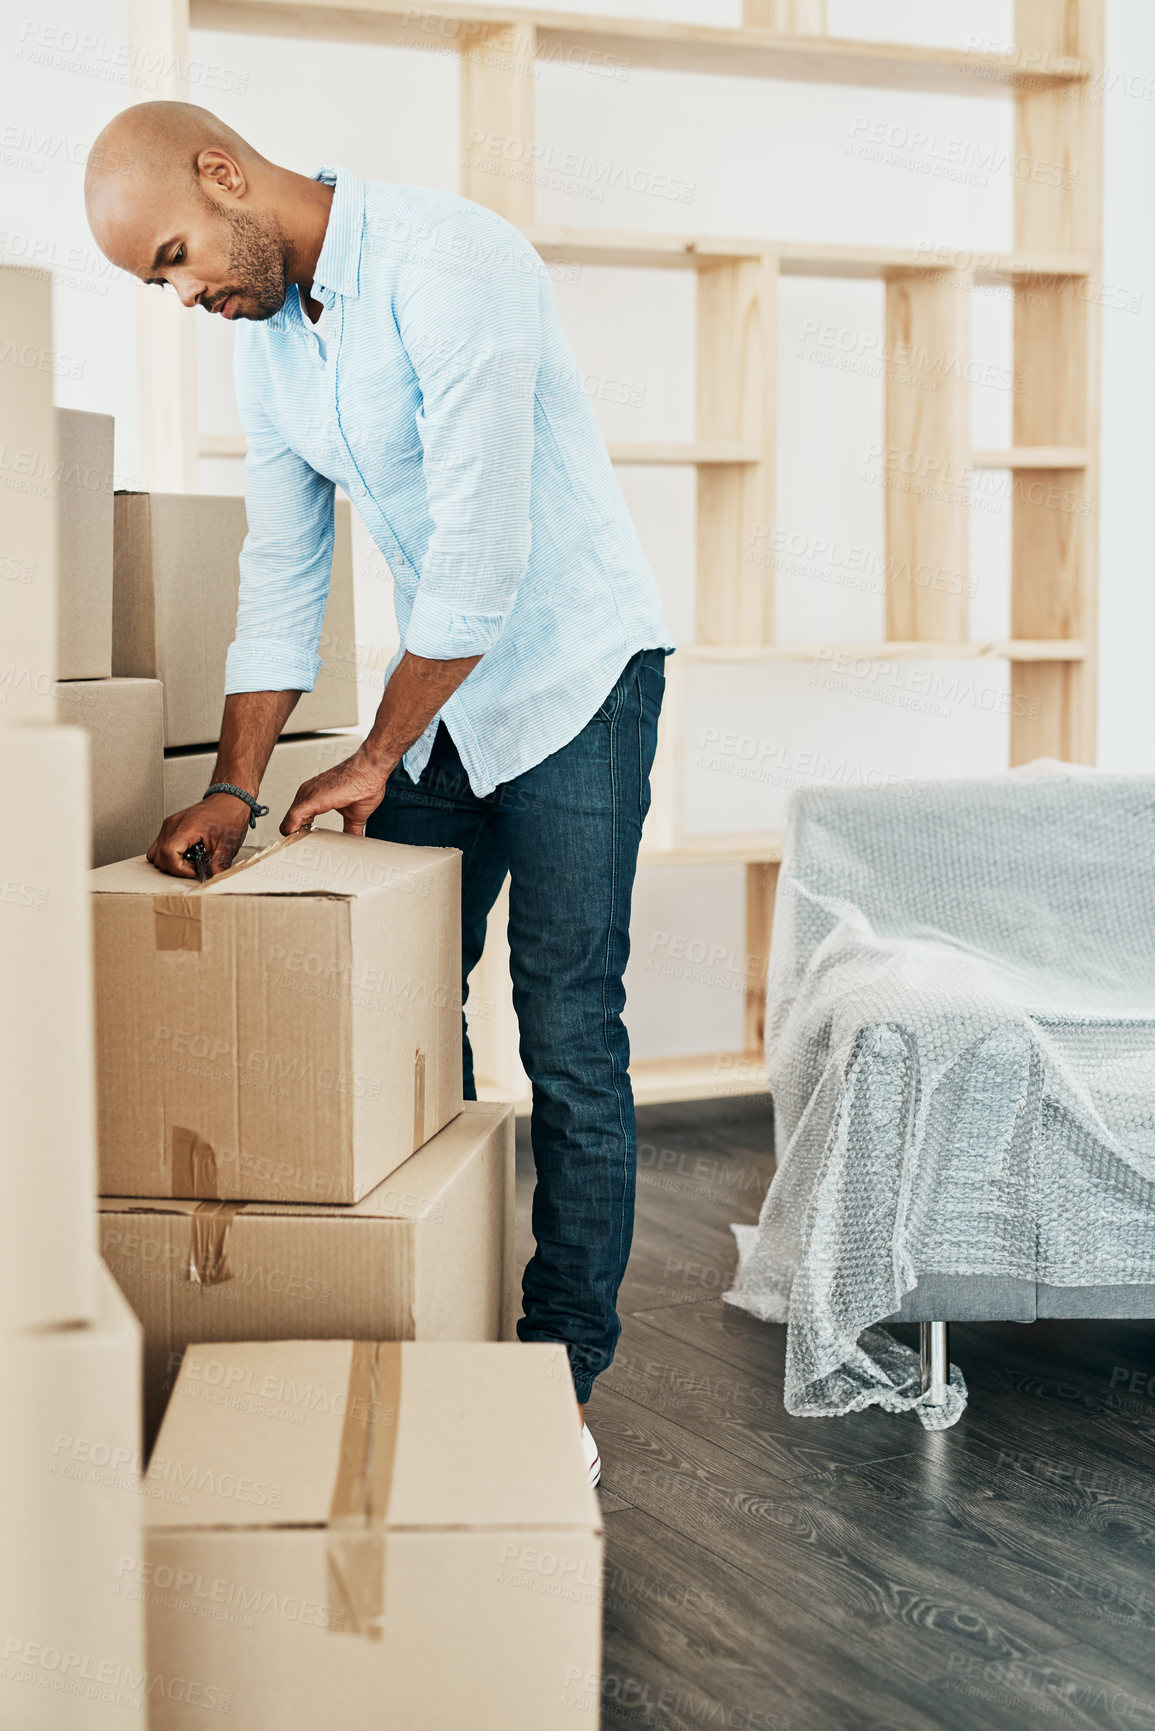 Buy stock photo Shot of a young man unpacking boxes while moving house